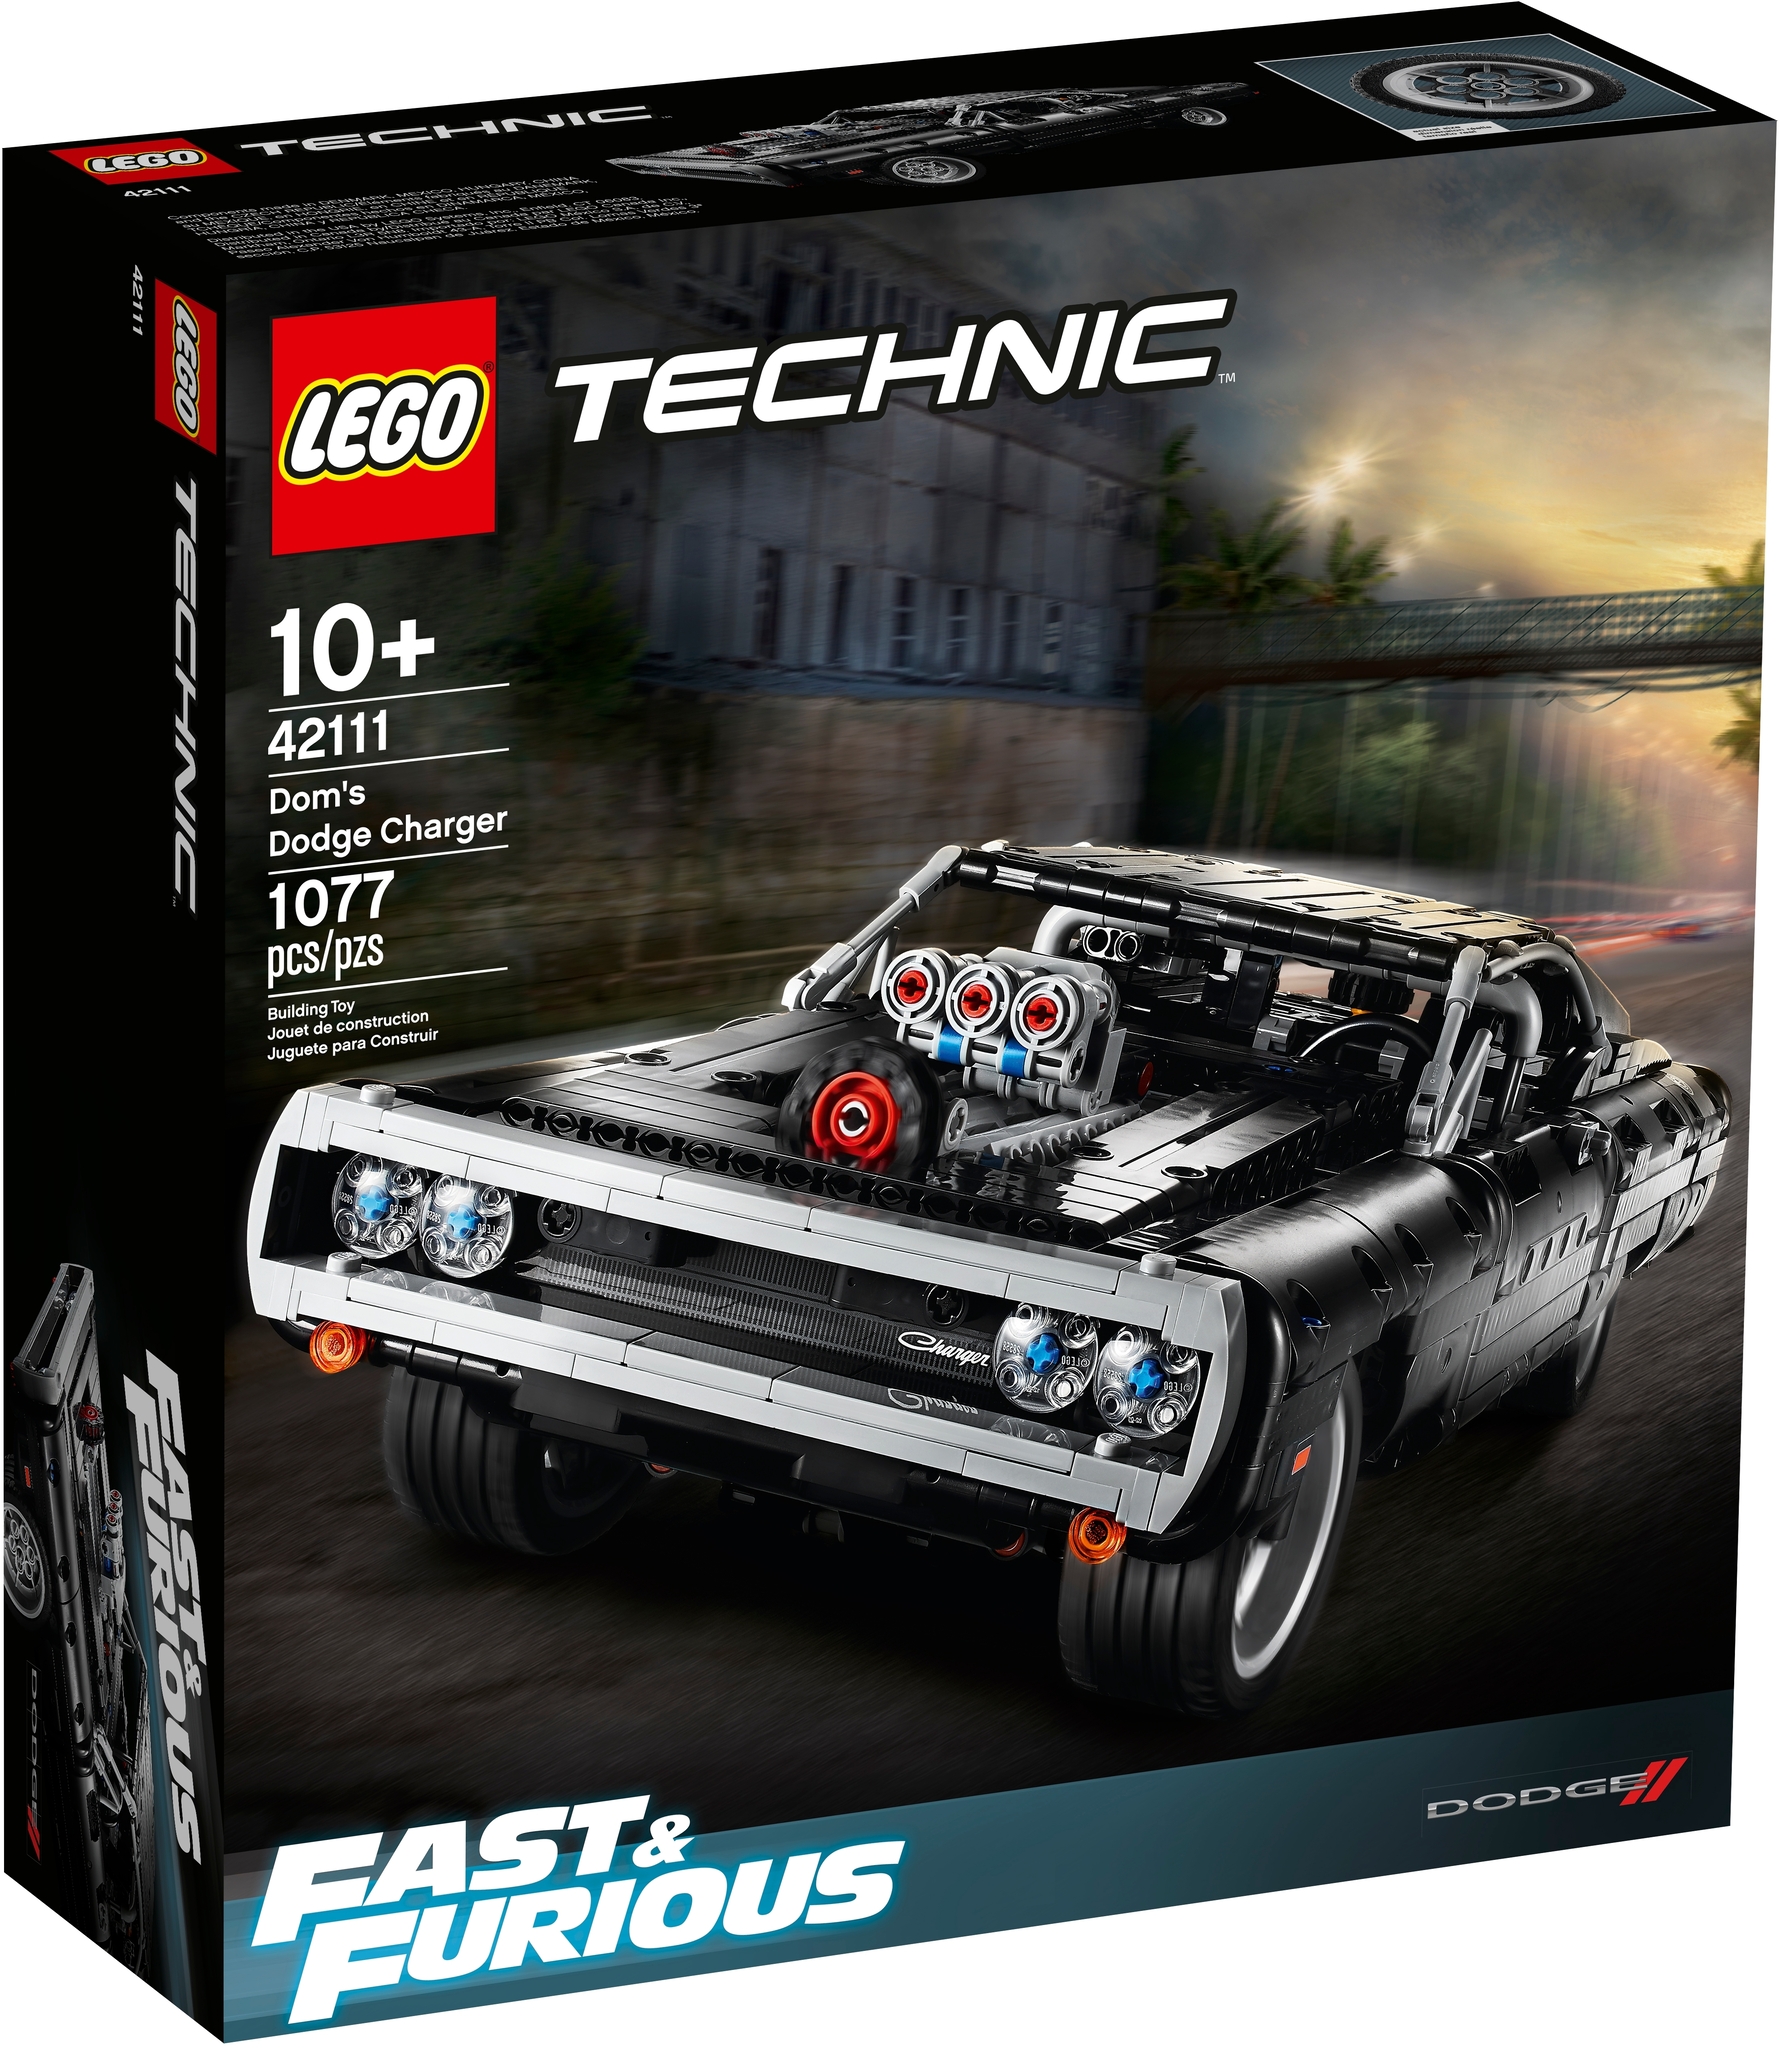 LEGO Technic 42111 - Dom's Dodge Charger